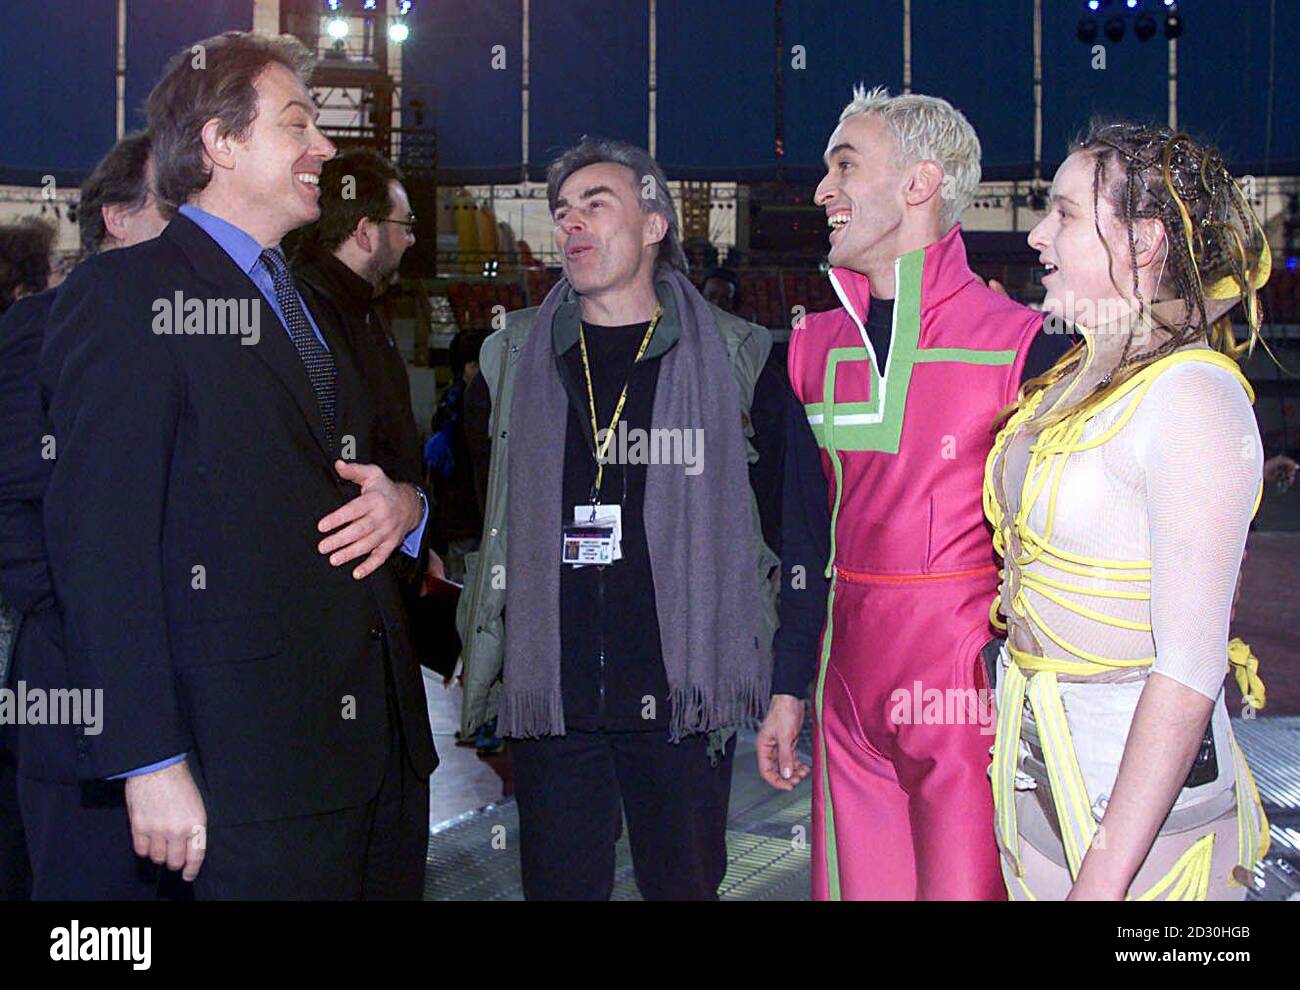 Prime Minister Tony Blair (left) talks to aerial acrobatic dancers Matt Costain (2nd right) and Corinne Pierre (right) who performed the Lovers Duet, which is to be one of the main events of the Millennium Dome celebrations.  * ...during his visit to the Dome in Greenwich. Stock Photo